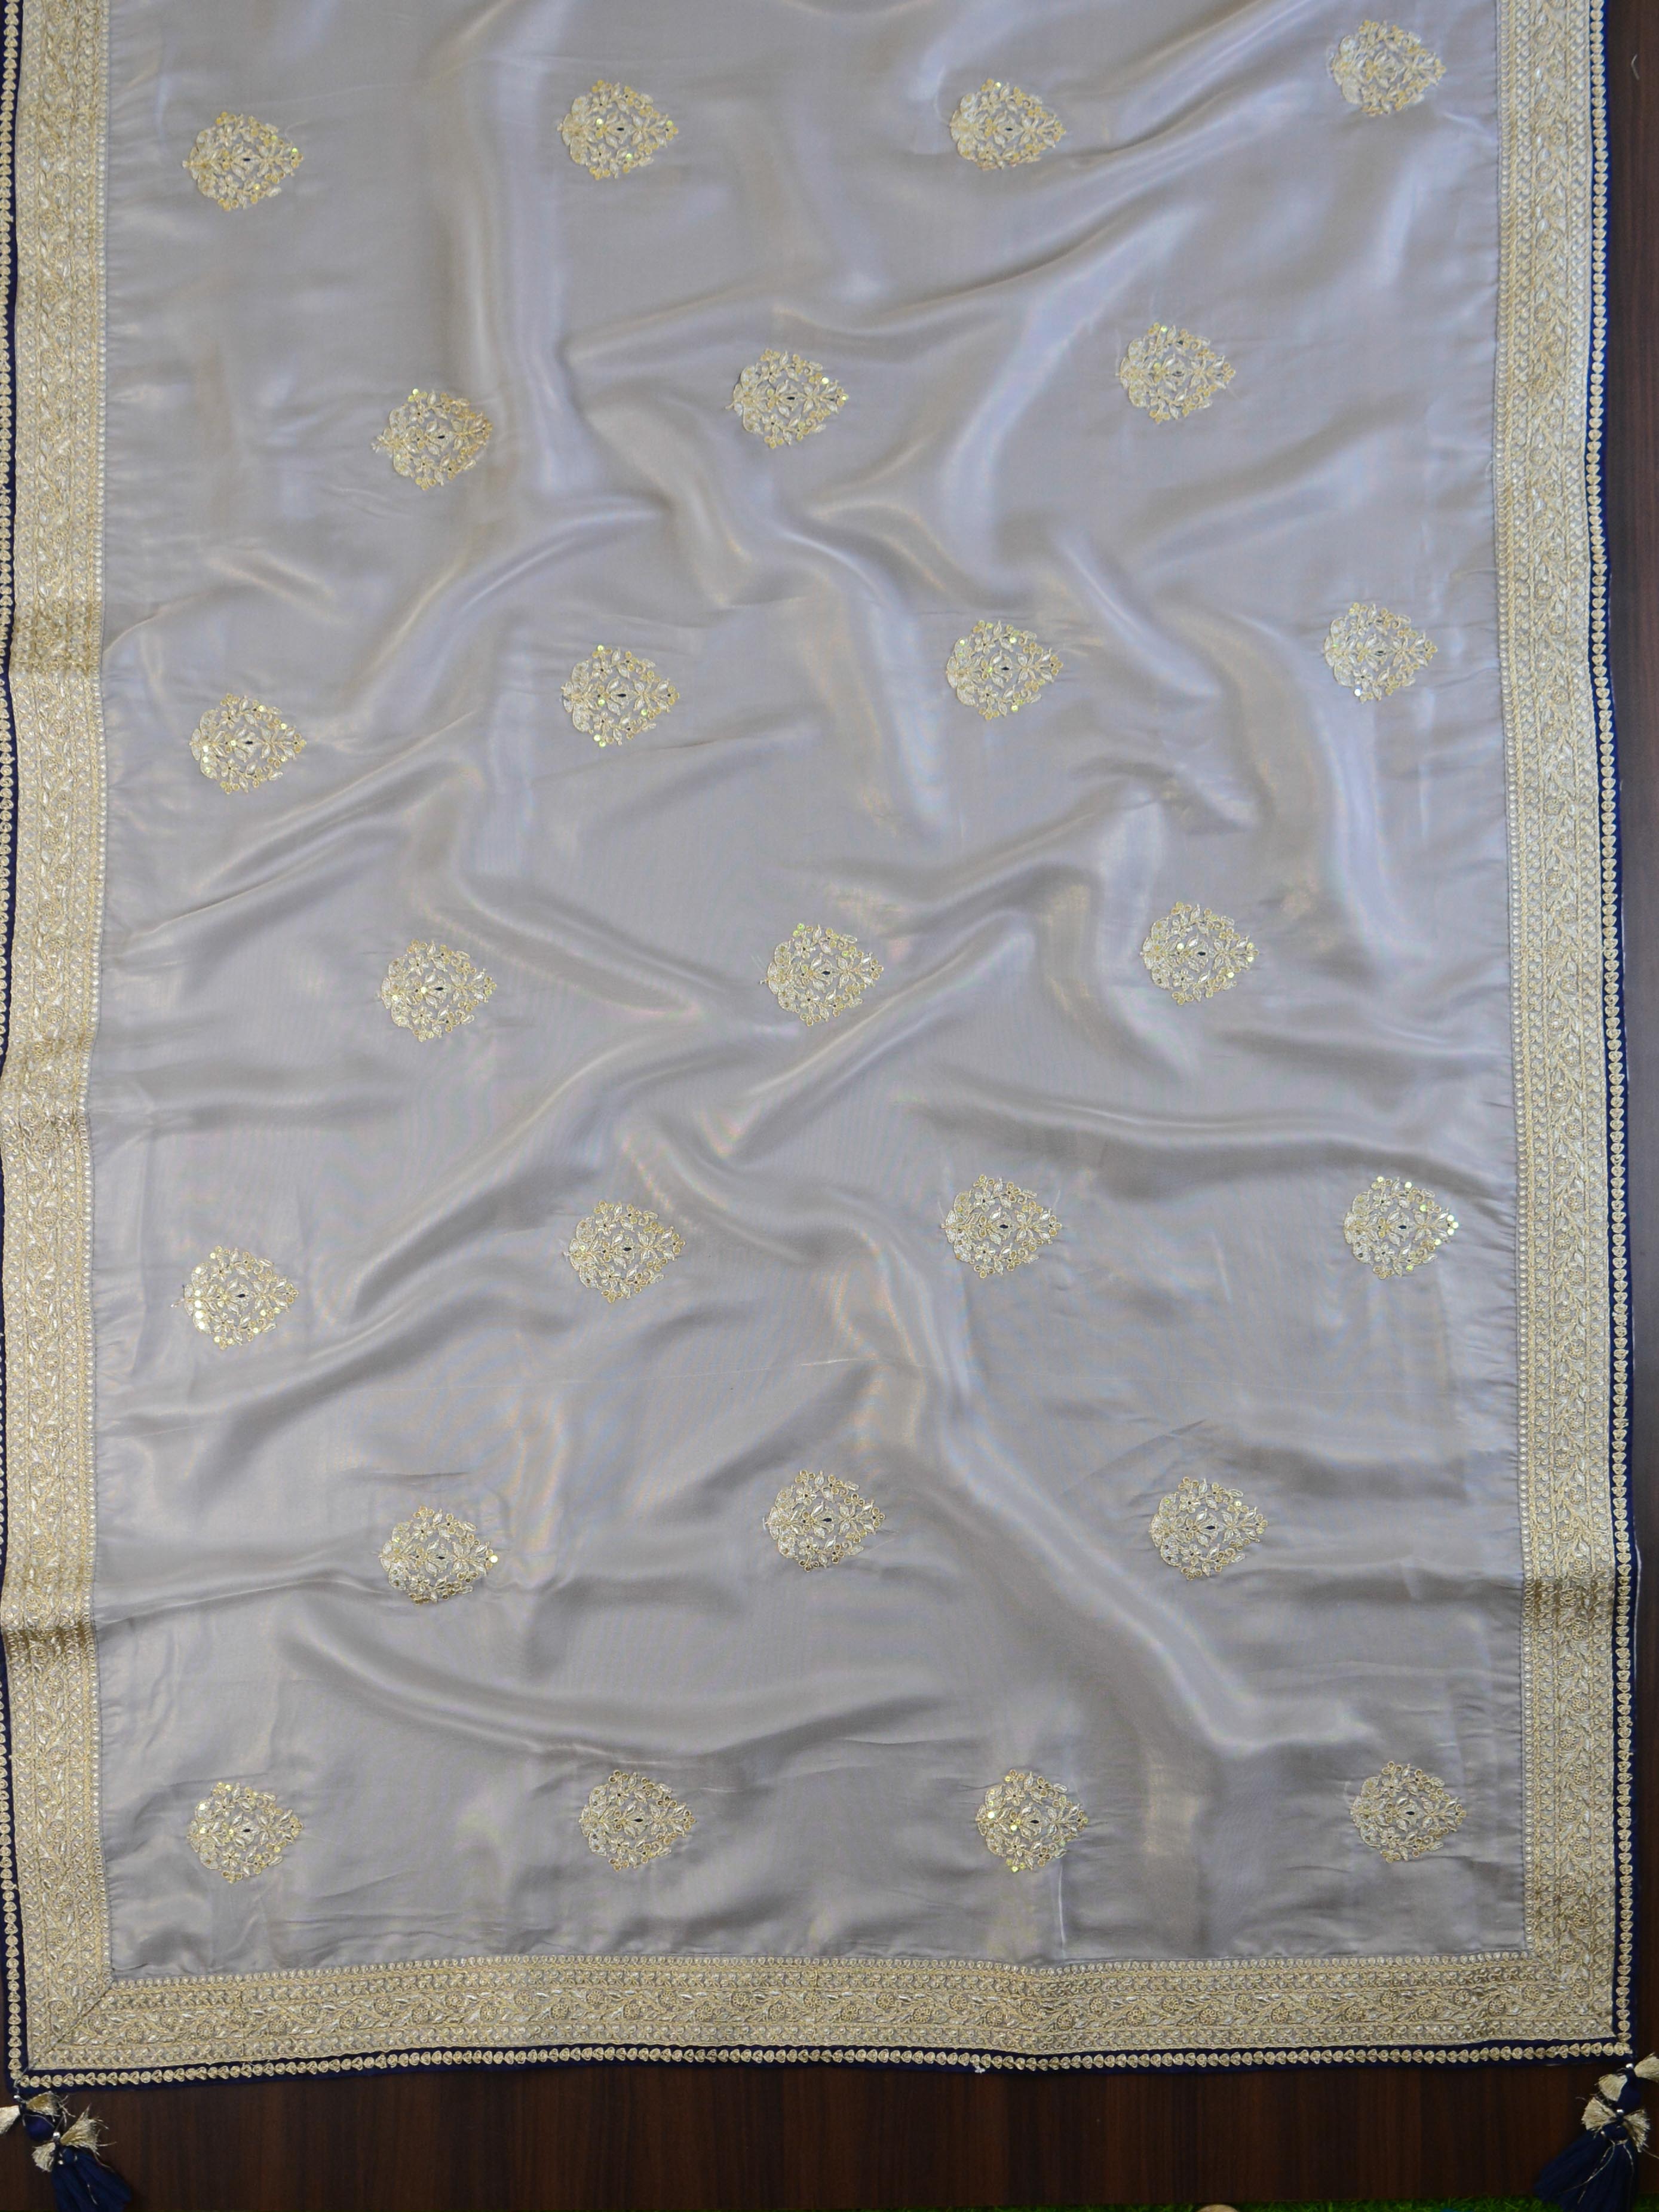 Banarasee Handwoven Embroidered Tissue Saree With Contrast Embroidered Blouse-Silver